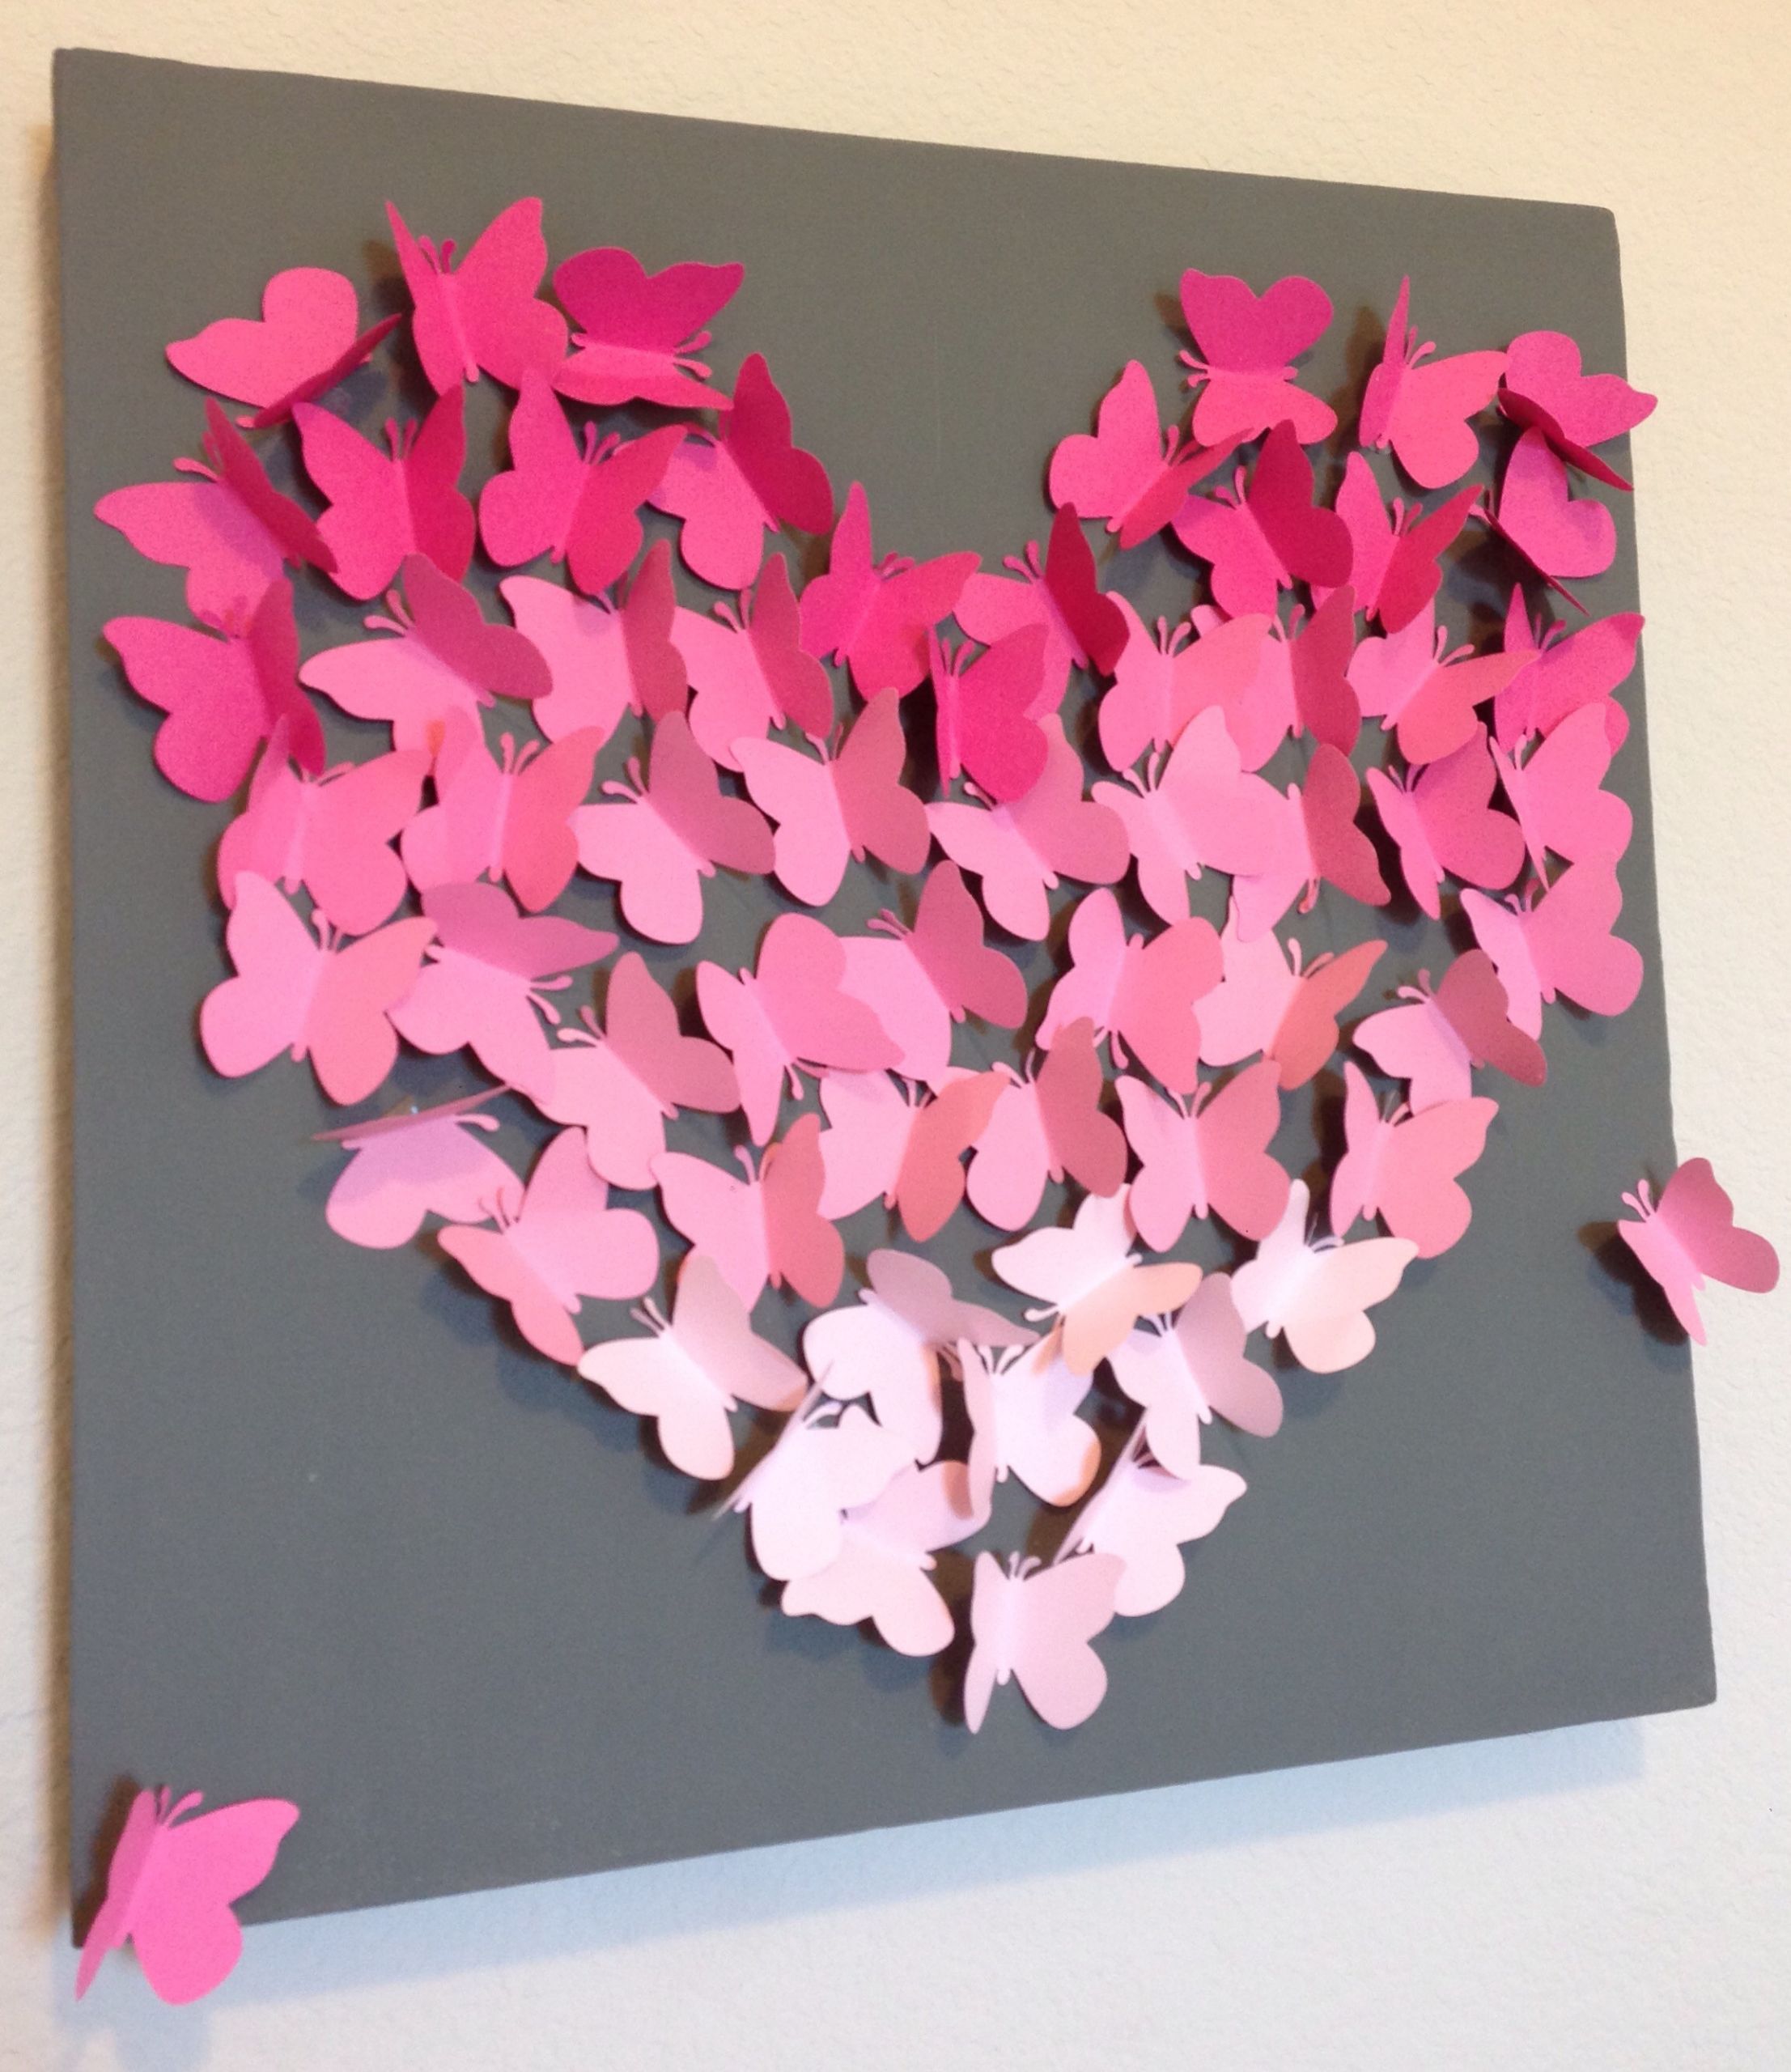 DIY Butterfly Wall Decorations
 DIY Ombre Butterfly Wall Art